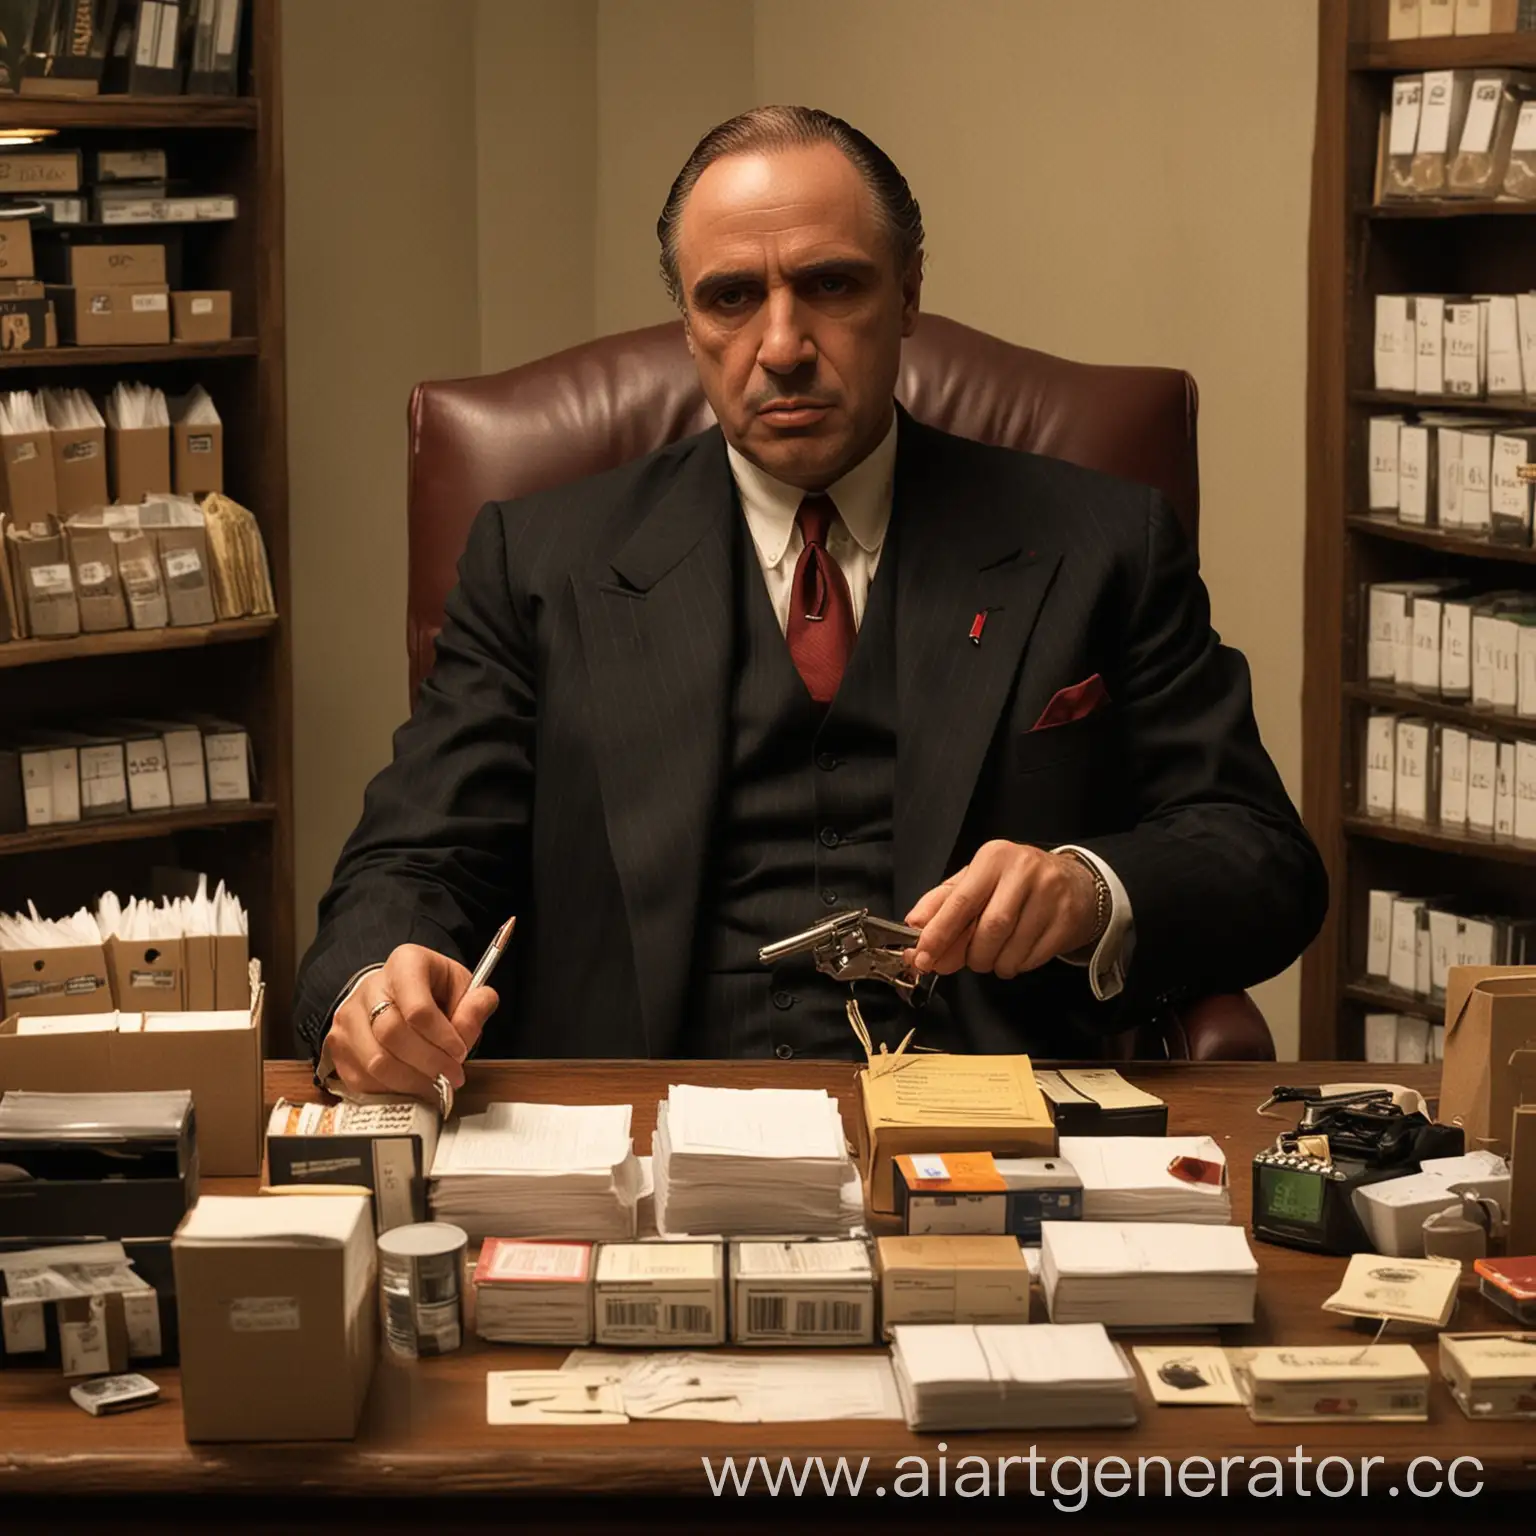 The Godfather buys office supplies